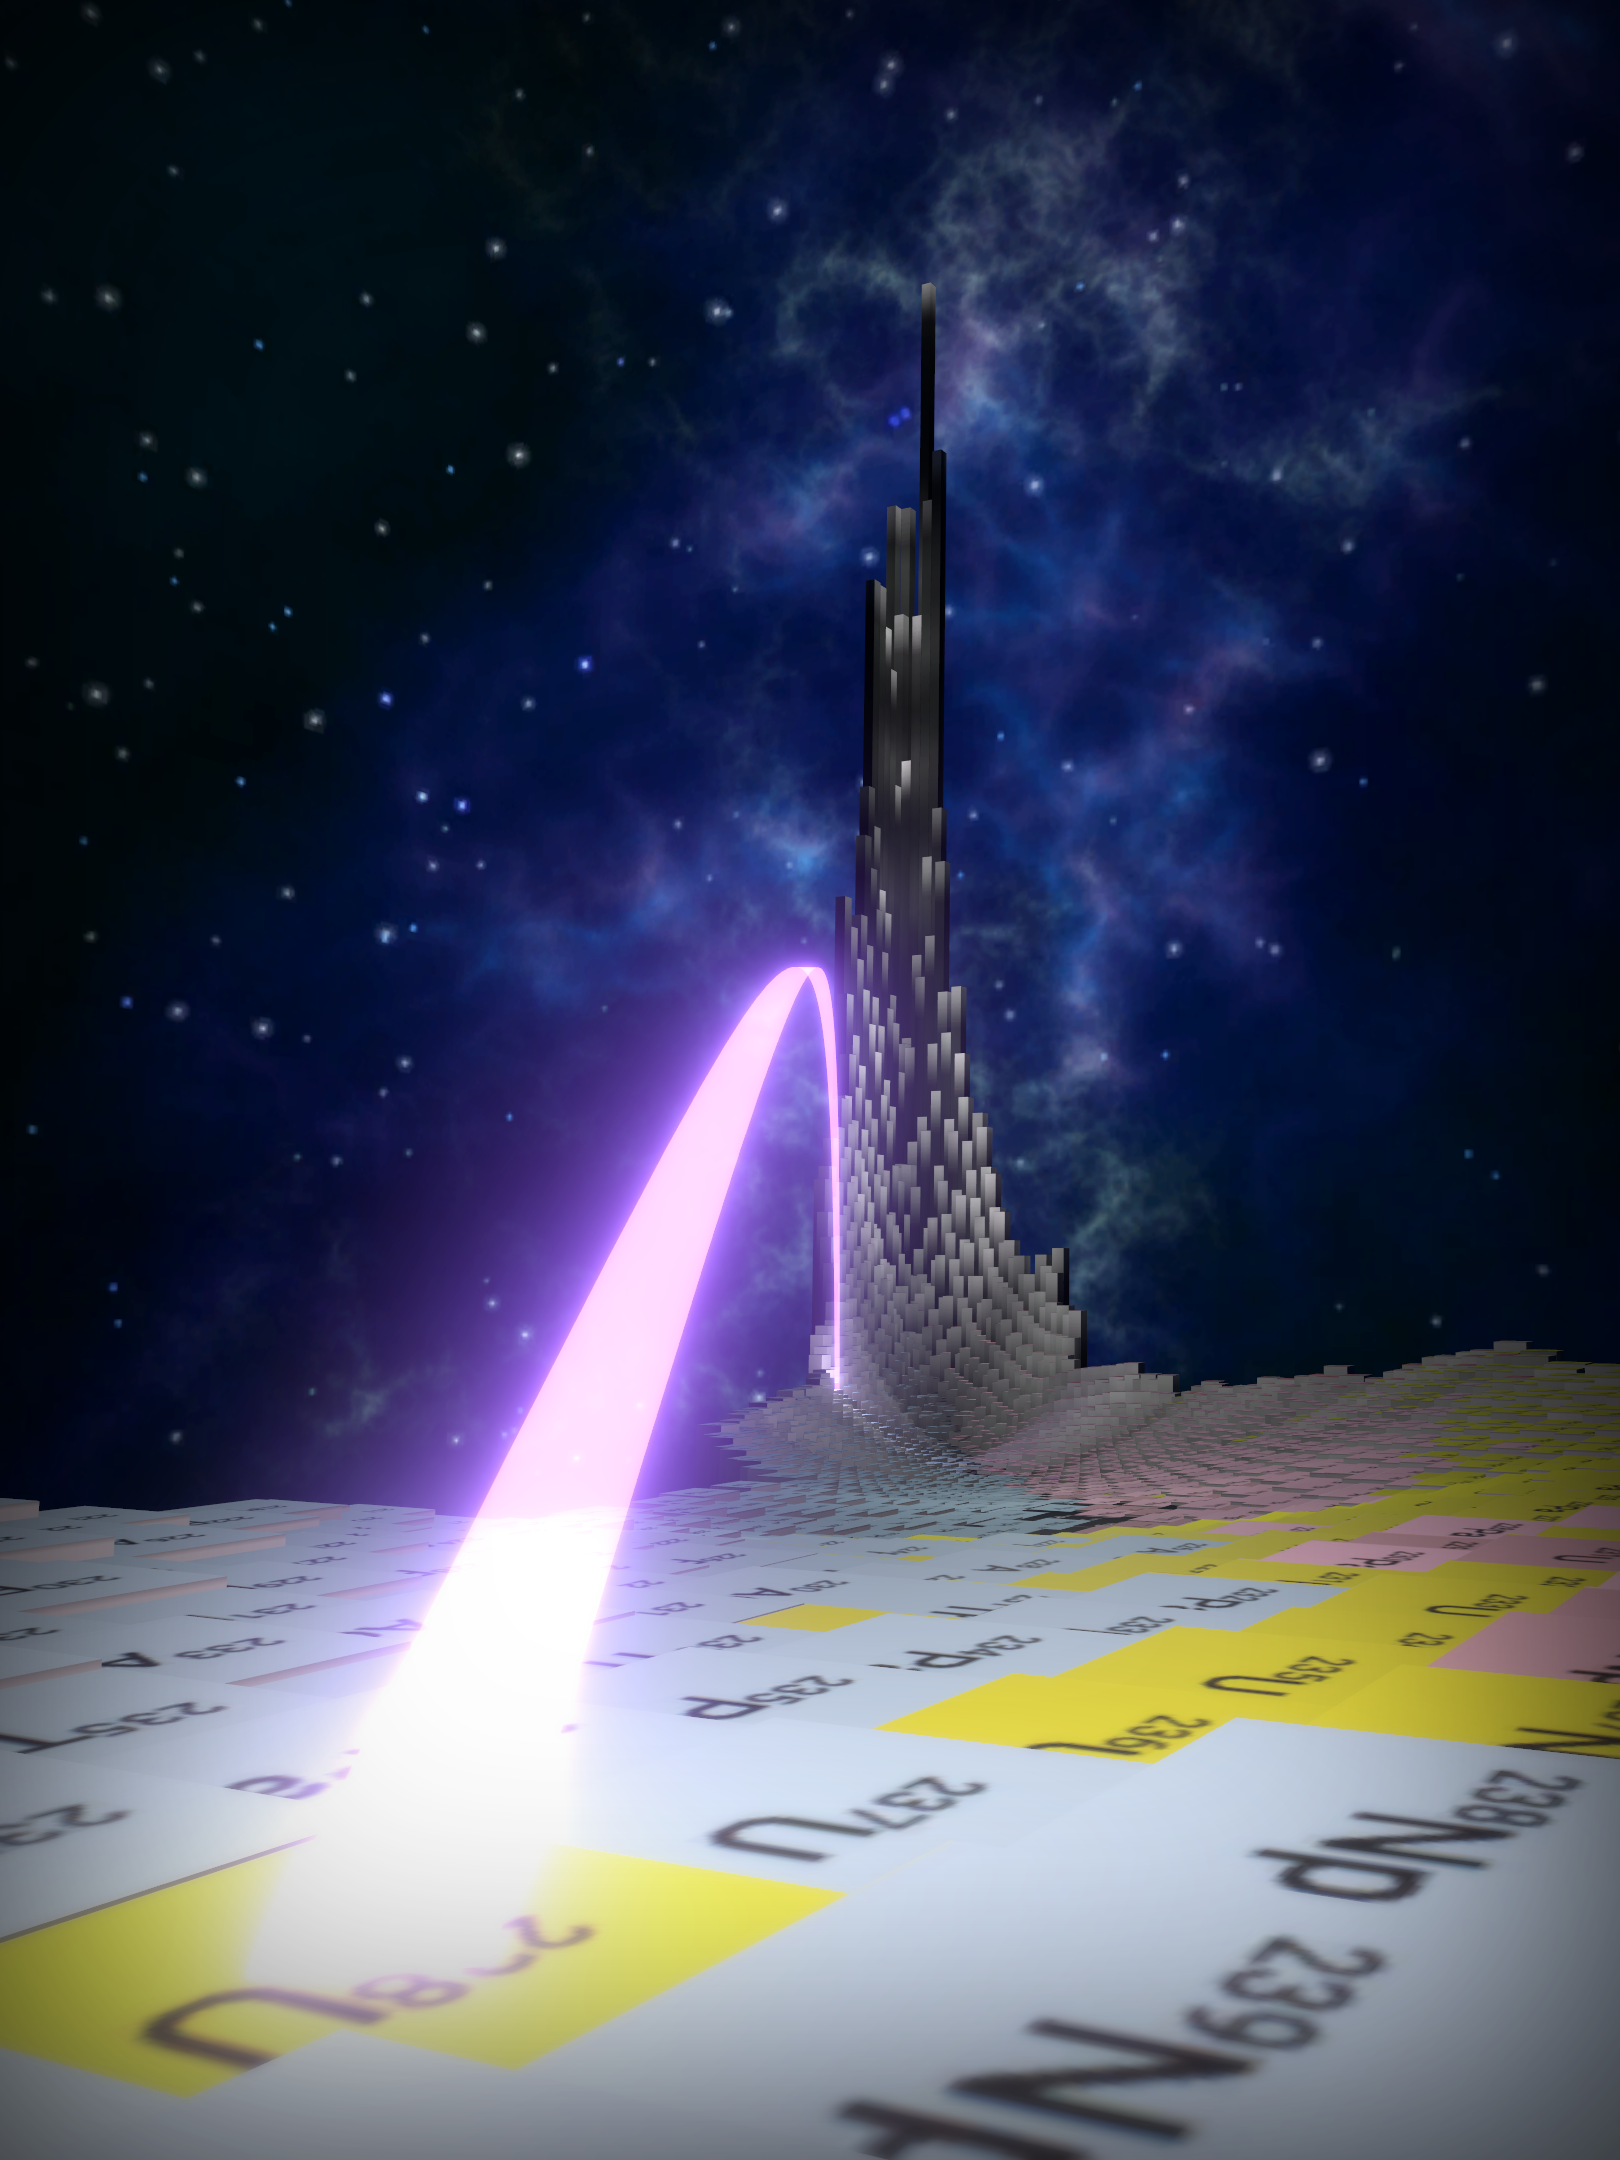 A dark tower in a landscape of tiles with a purple ray eminating from it